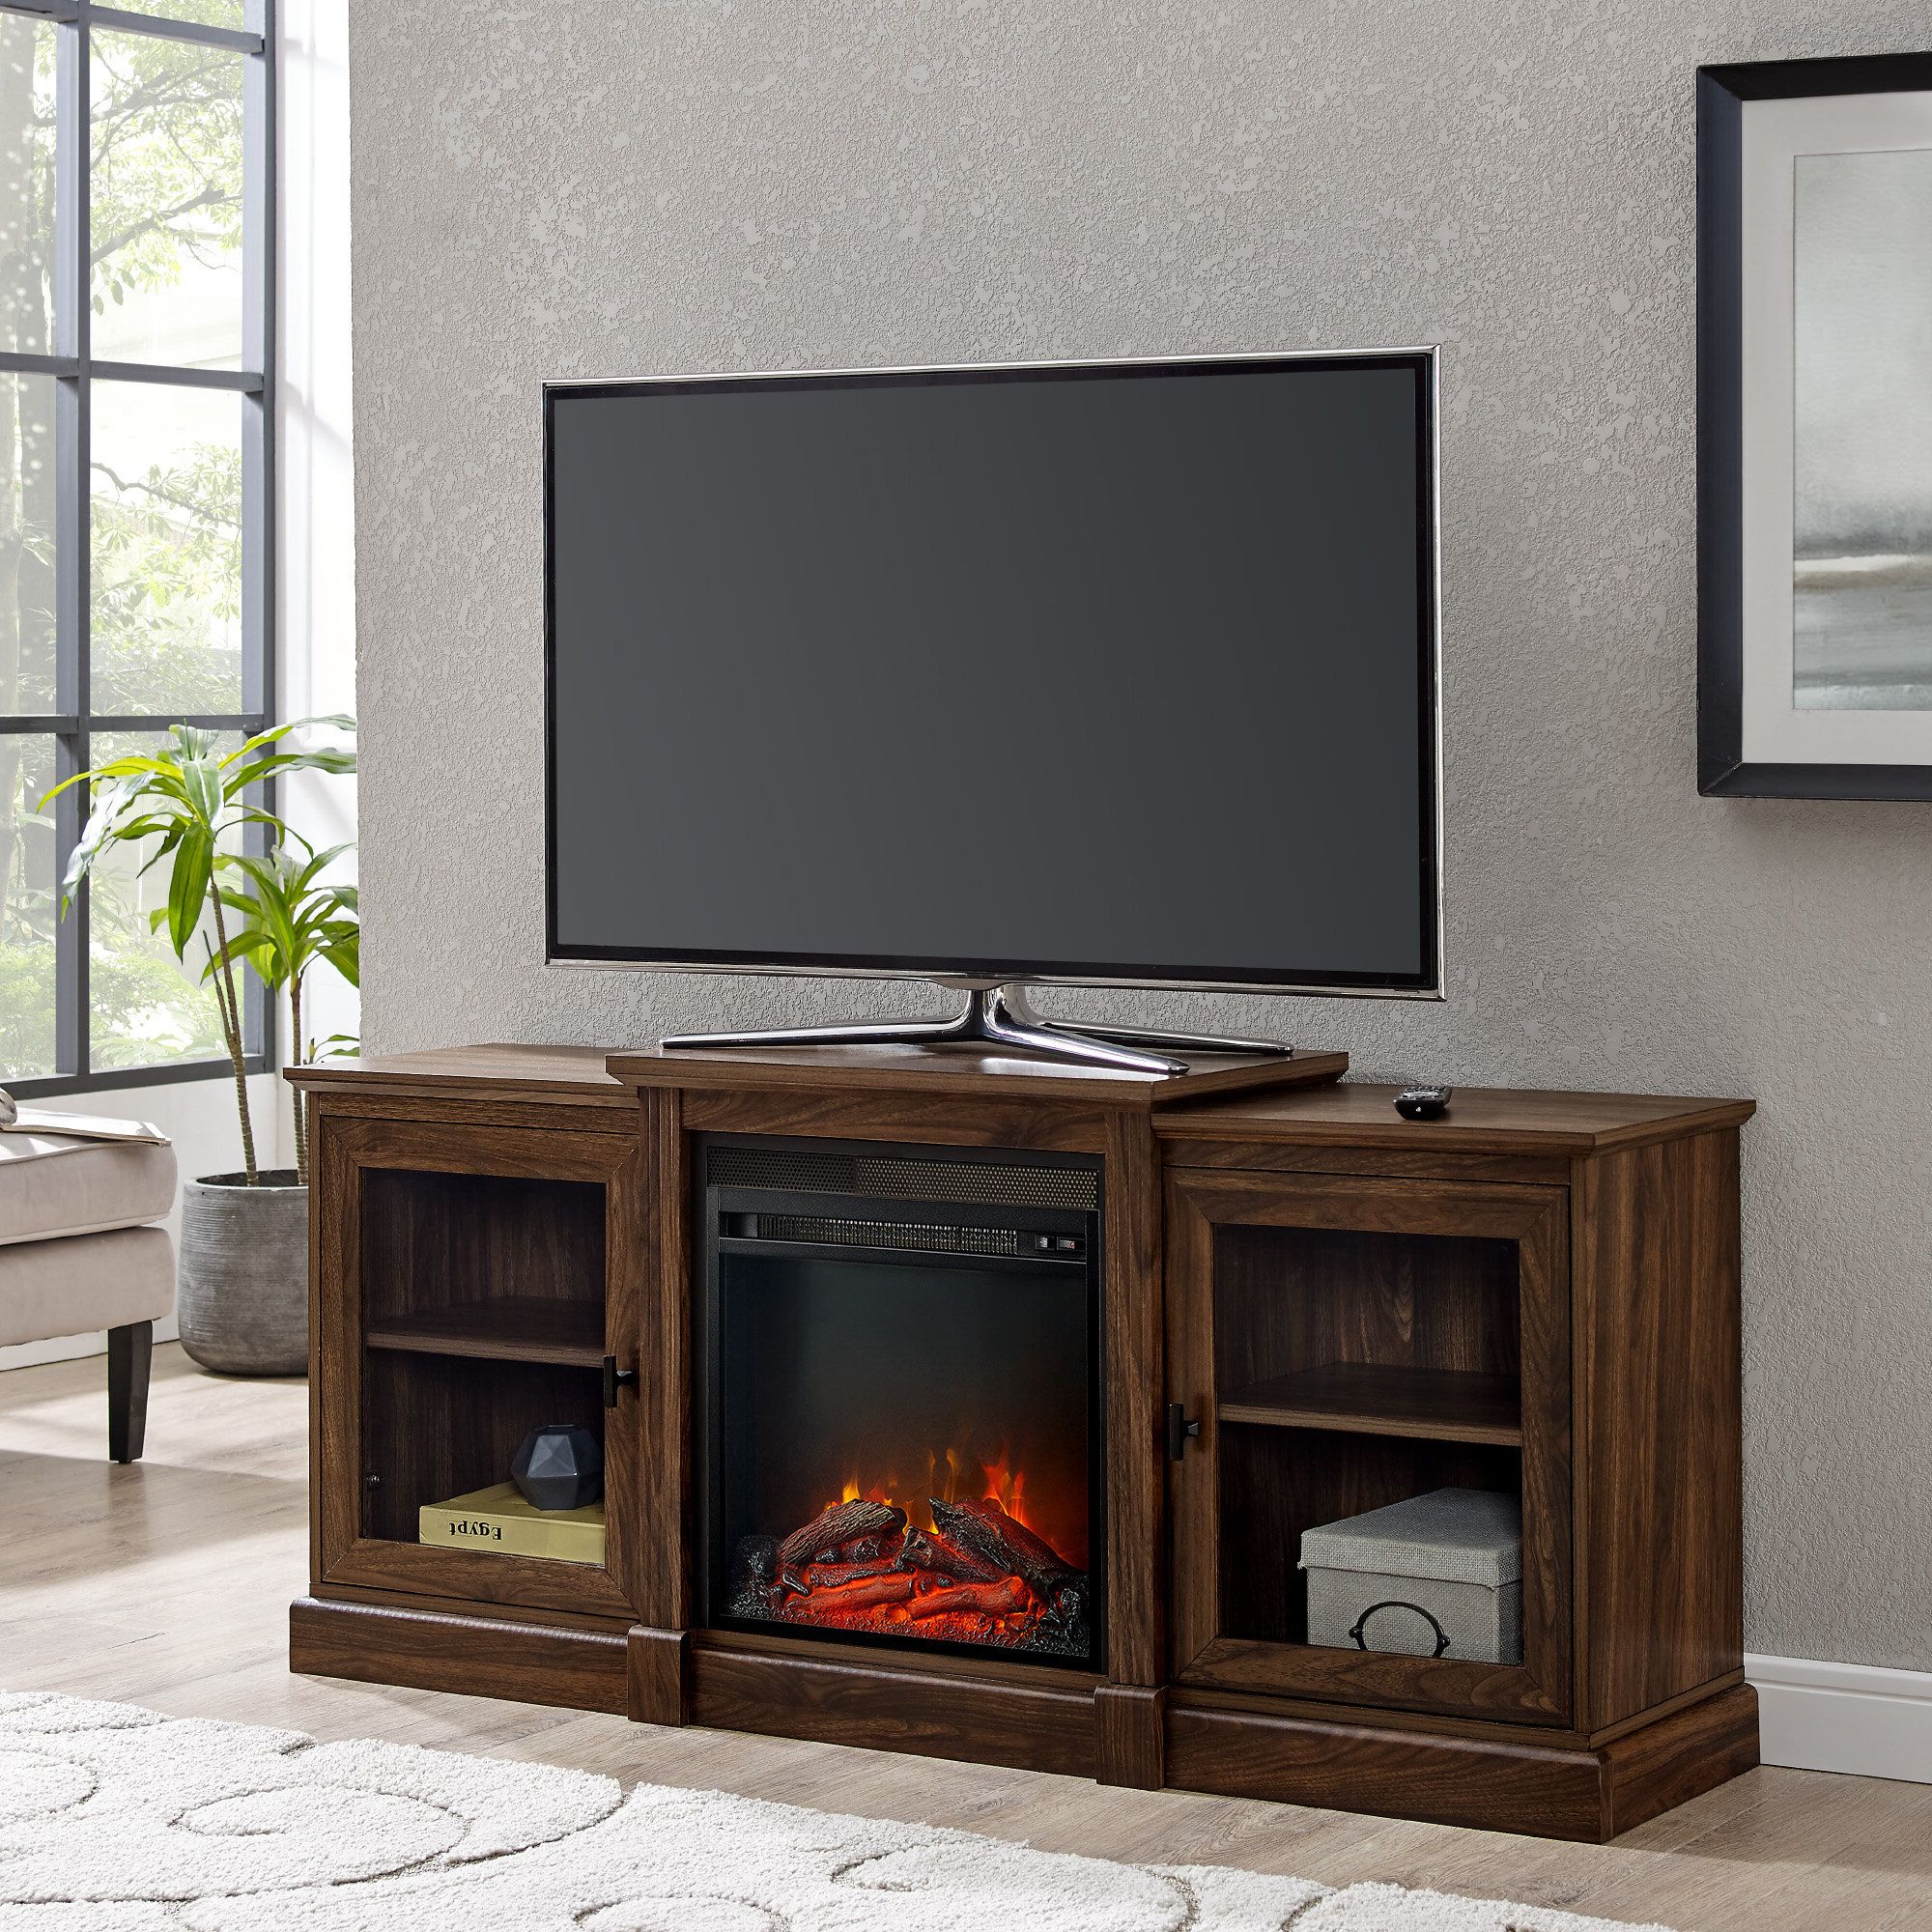 Stamford Tv Stands For Tvs Up To 65" In Current 65 Inch Tv Stand With Fireplace (View 3 of 25)